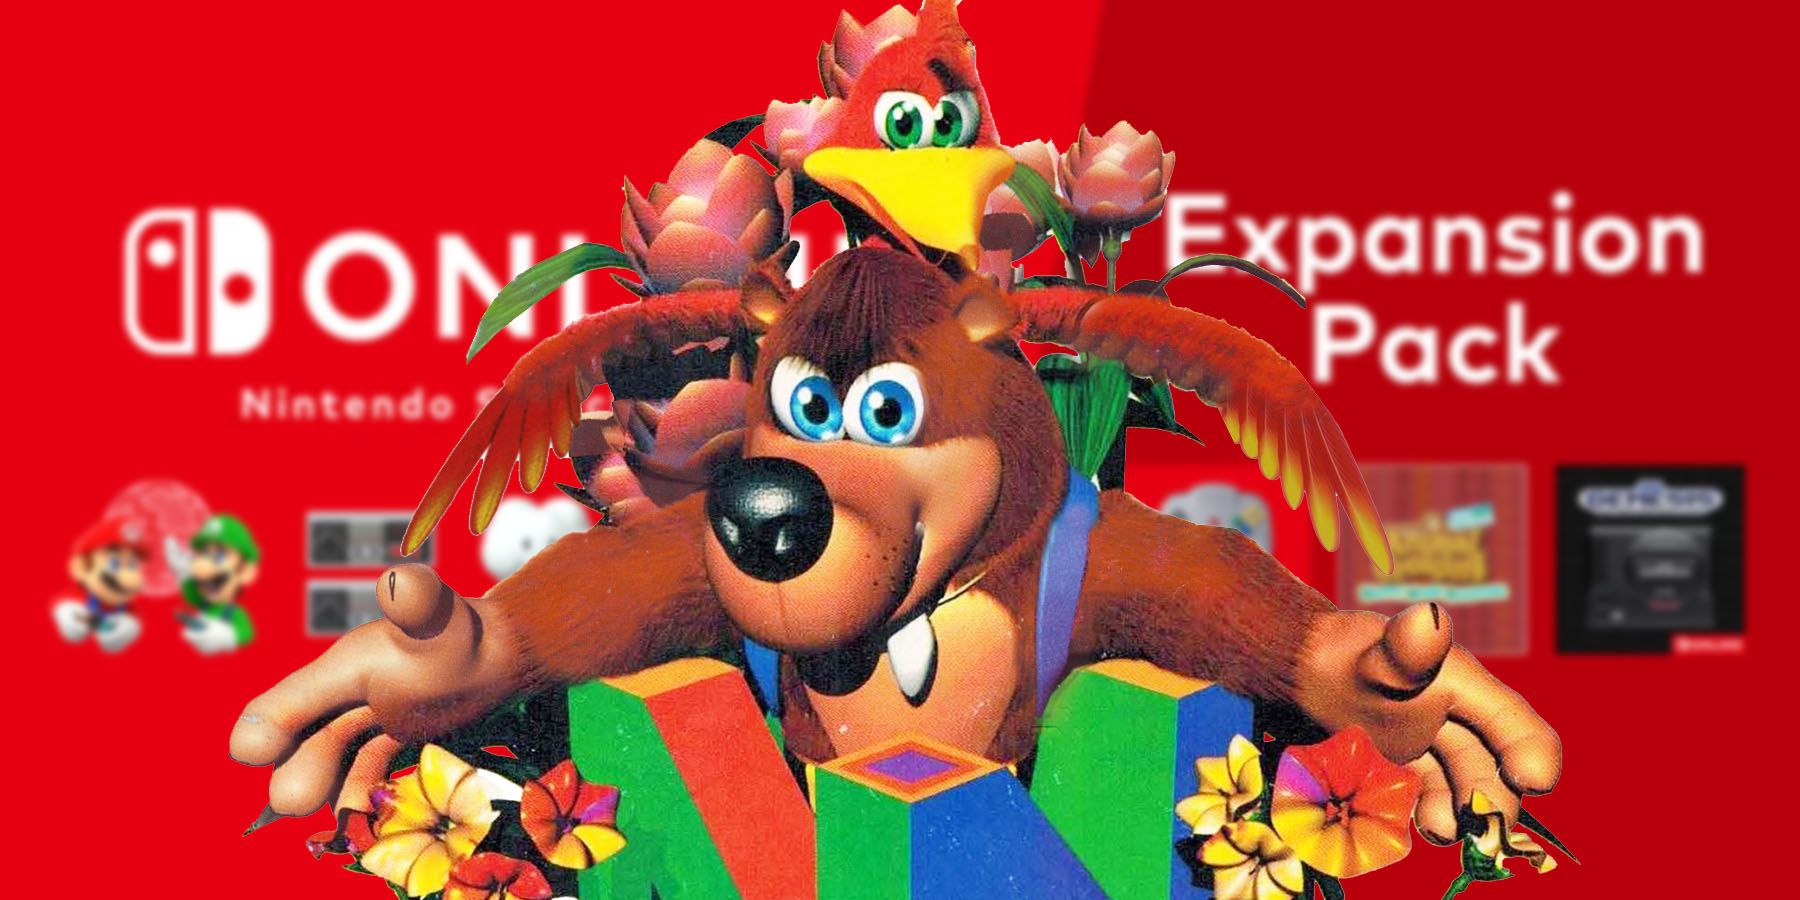 Banjo-Kazooie Is 'Coming Home' To A Nintendo Console Via Switch